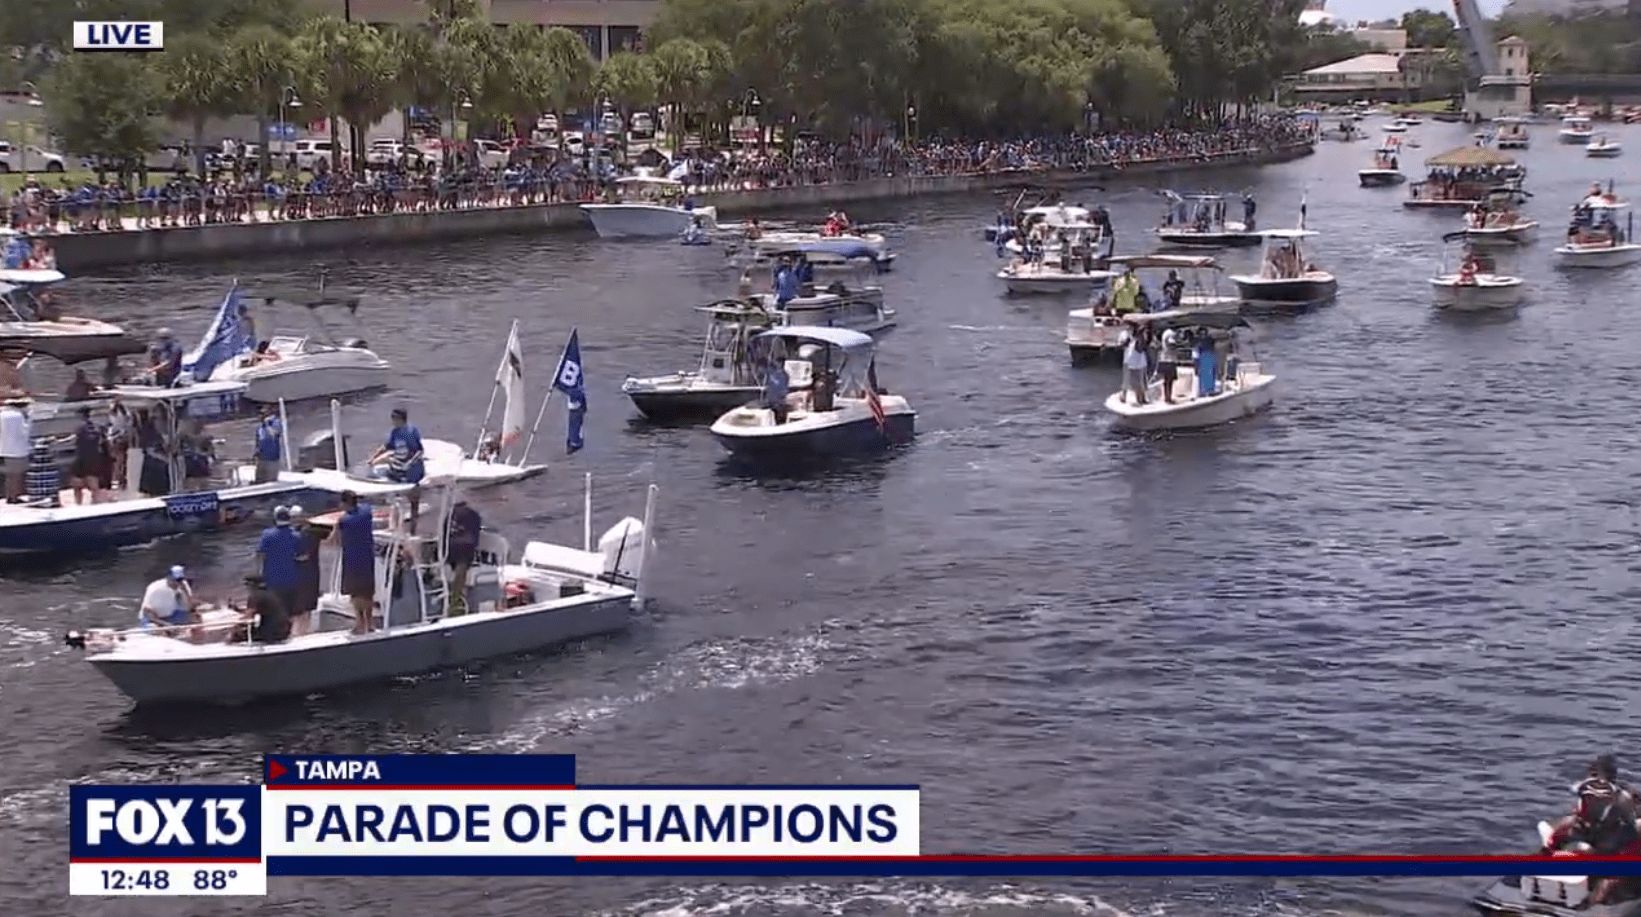 Stanley Cup headed to Montreal for repairs after Tamp Bay boat parade